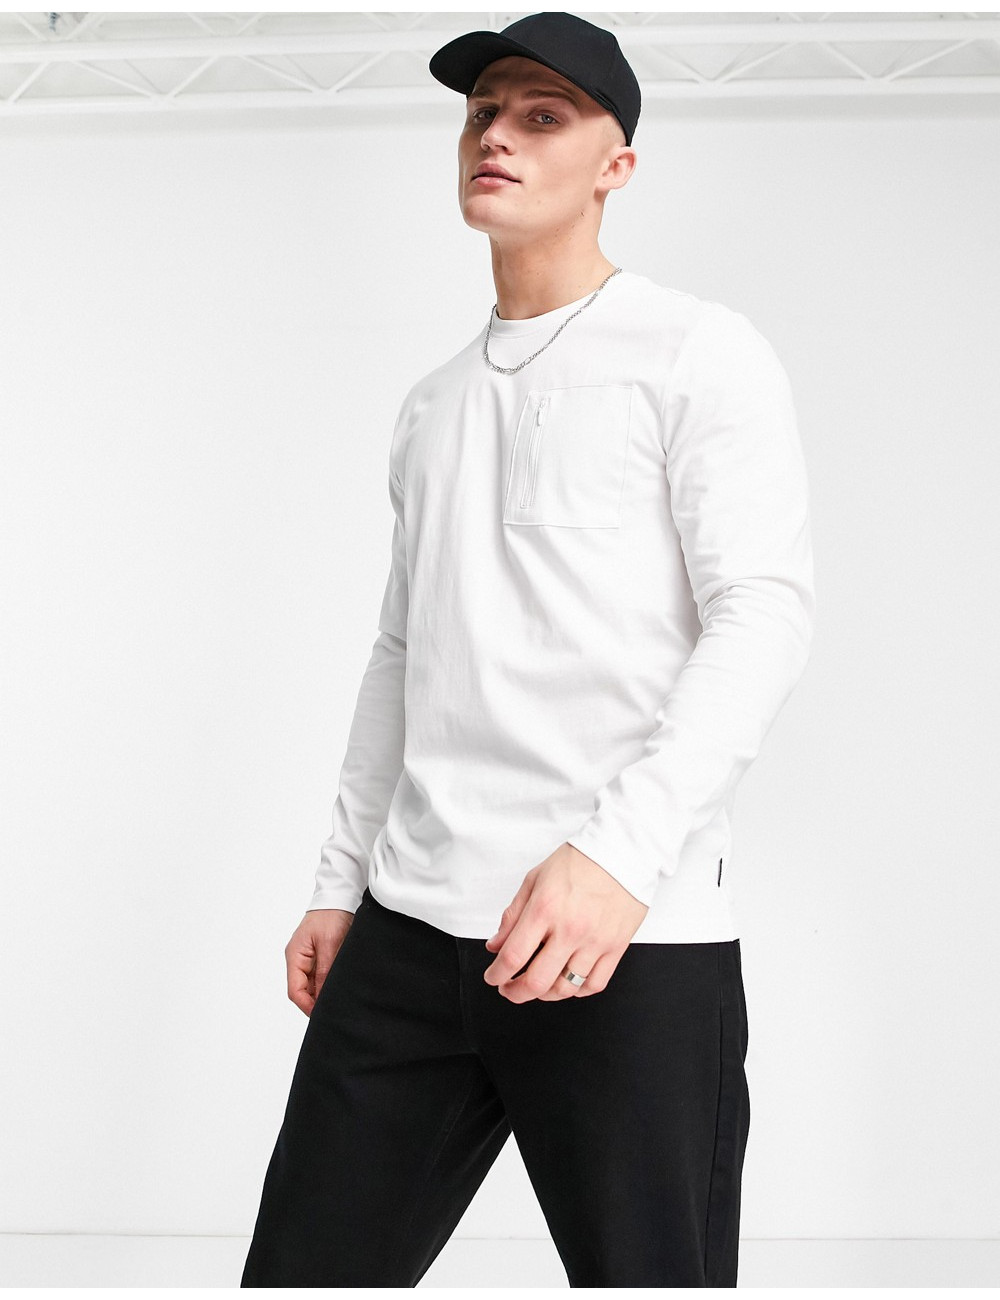 Only & Sons long sleeve top...